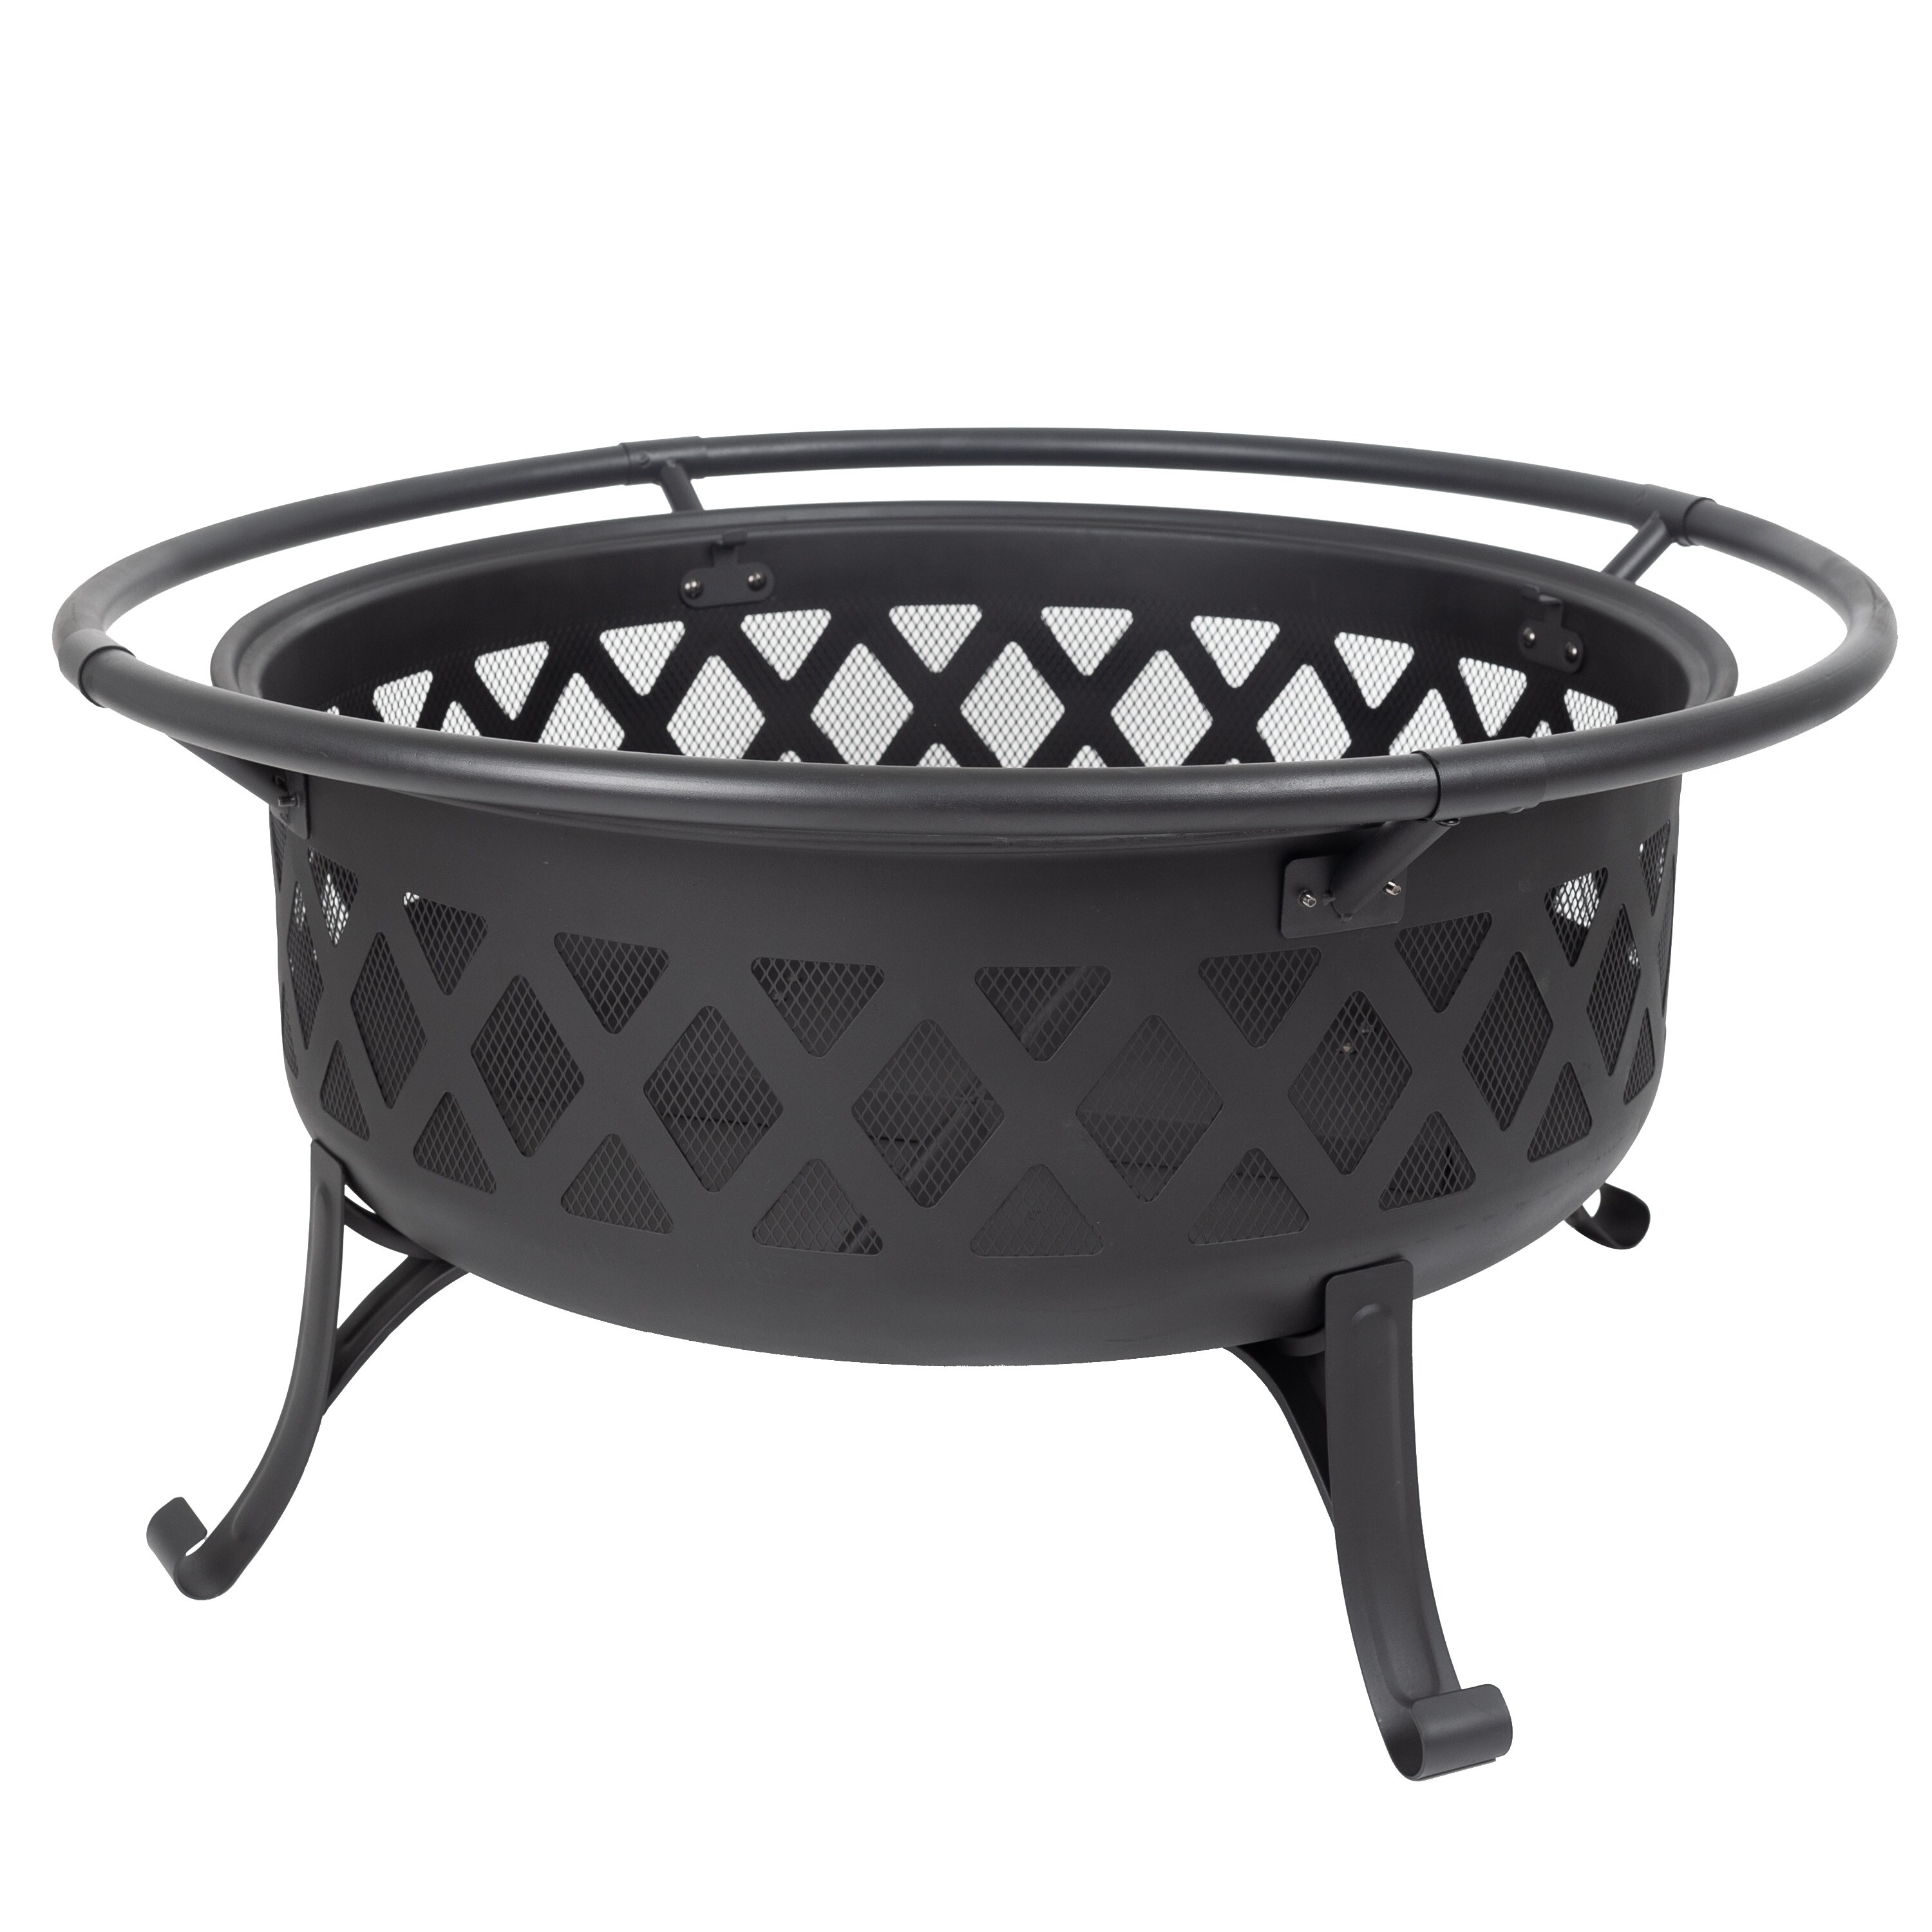 Wood-Burning Fire Pit 35-in Round Bowl Black Steel Spark Screen w/Cover New 